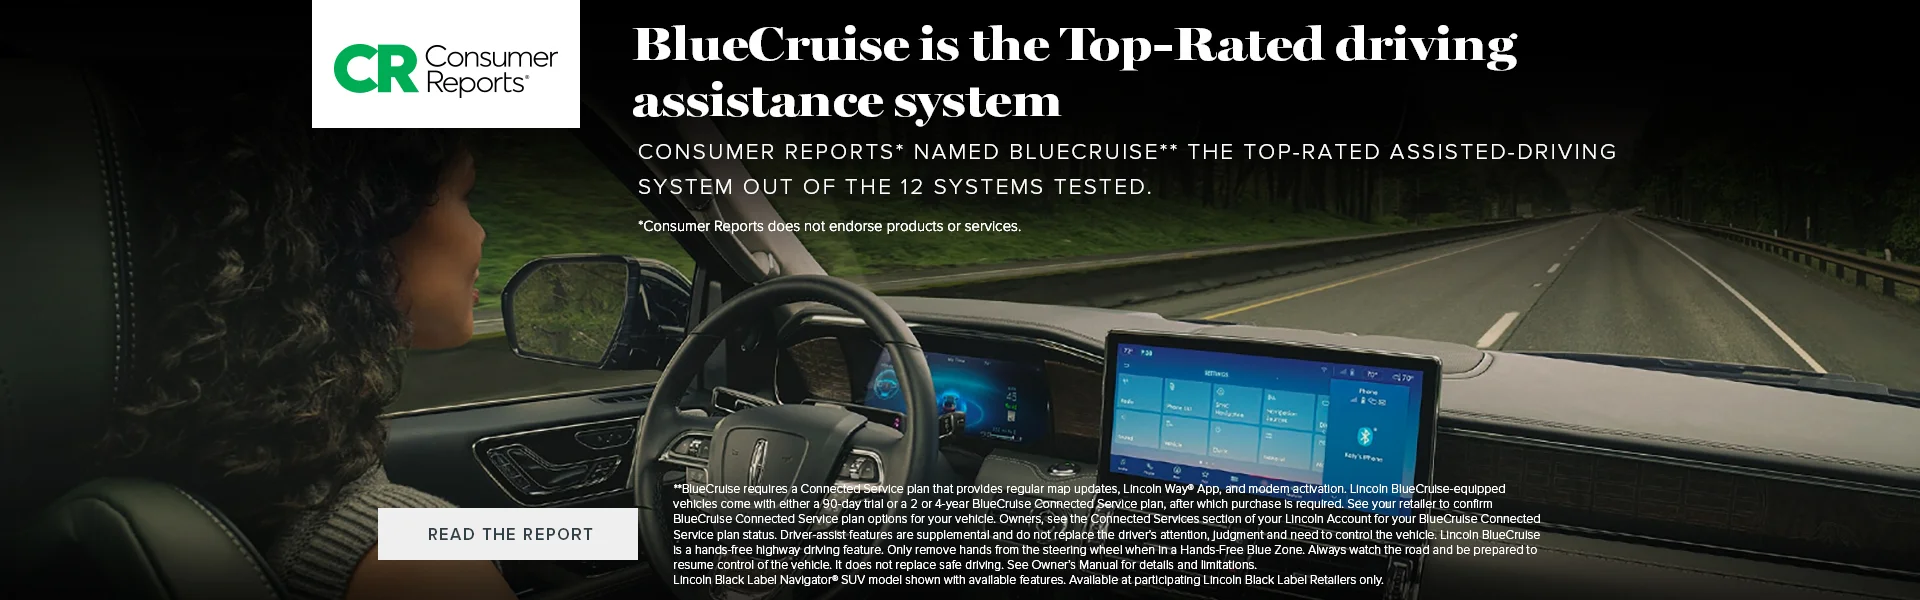 Lincoln BlueCruise is Top-Rated by Consumer Reports